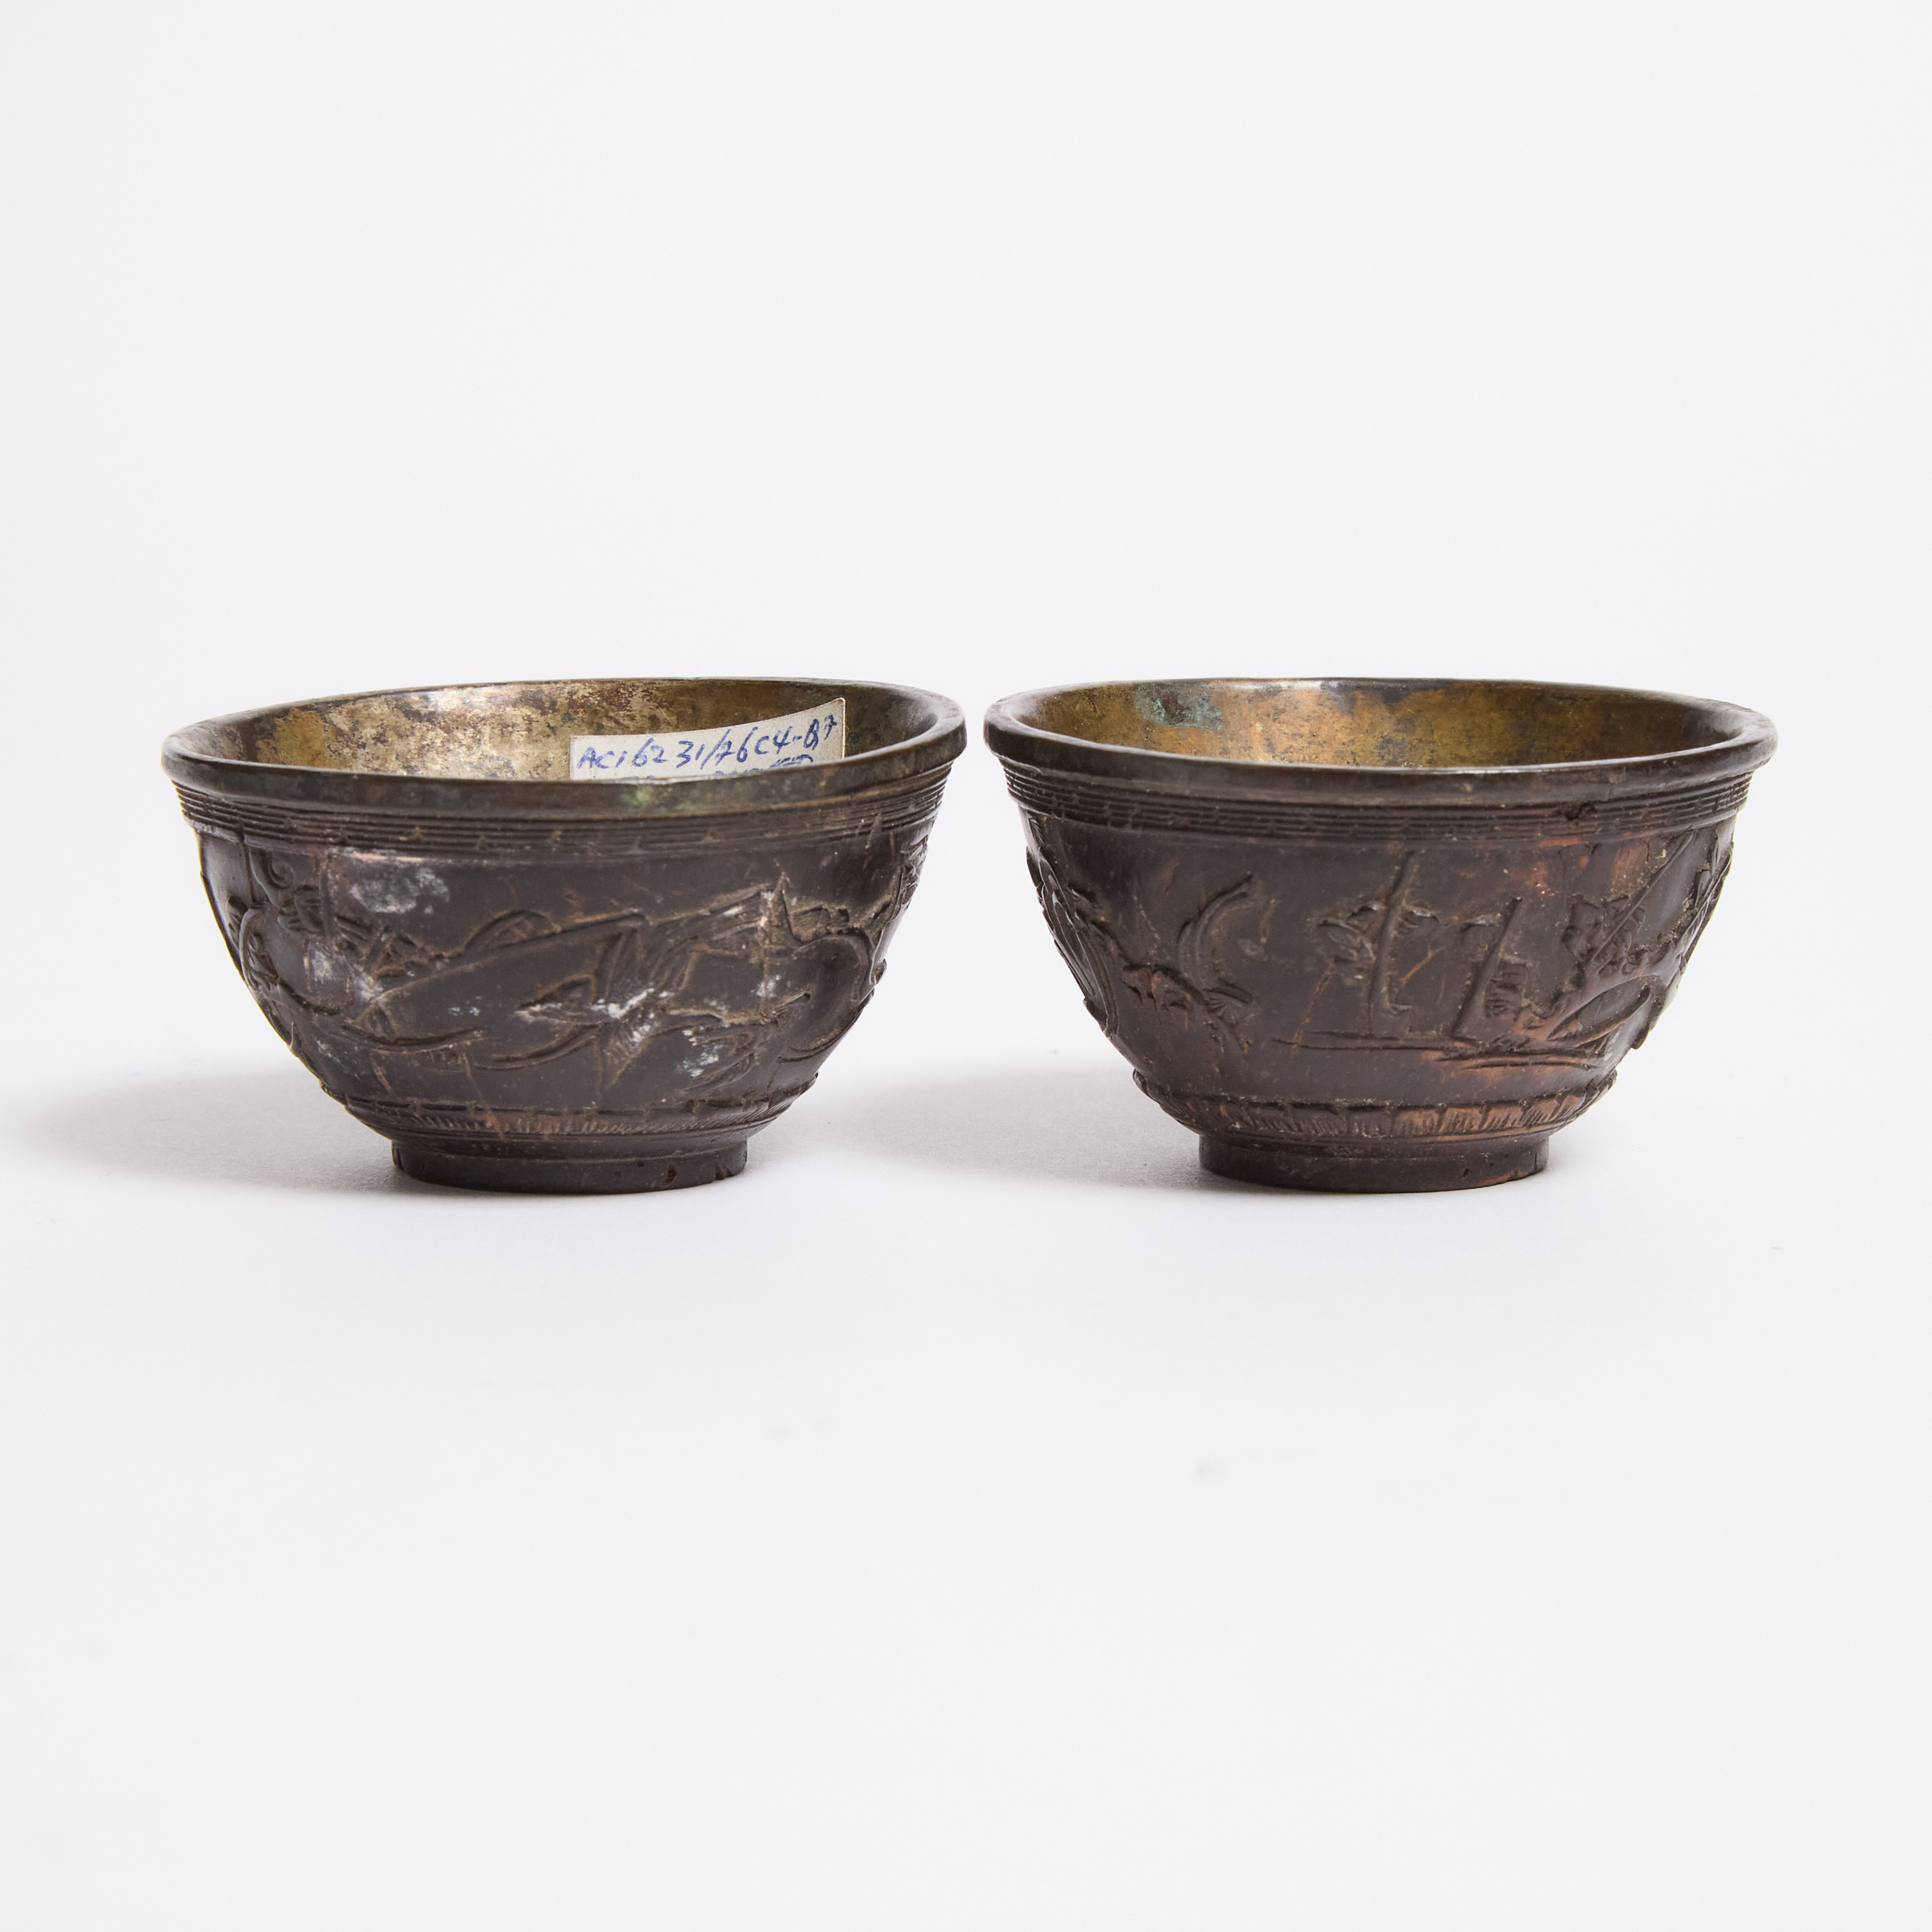 A Pair of Chinese Silver-Mounted